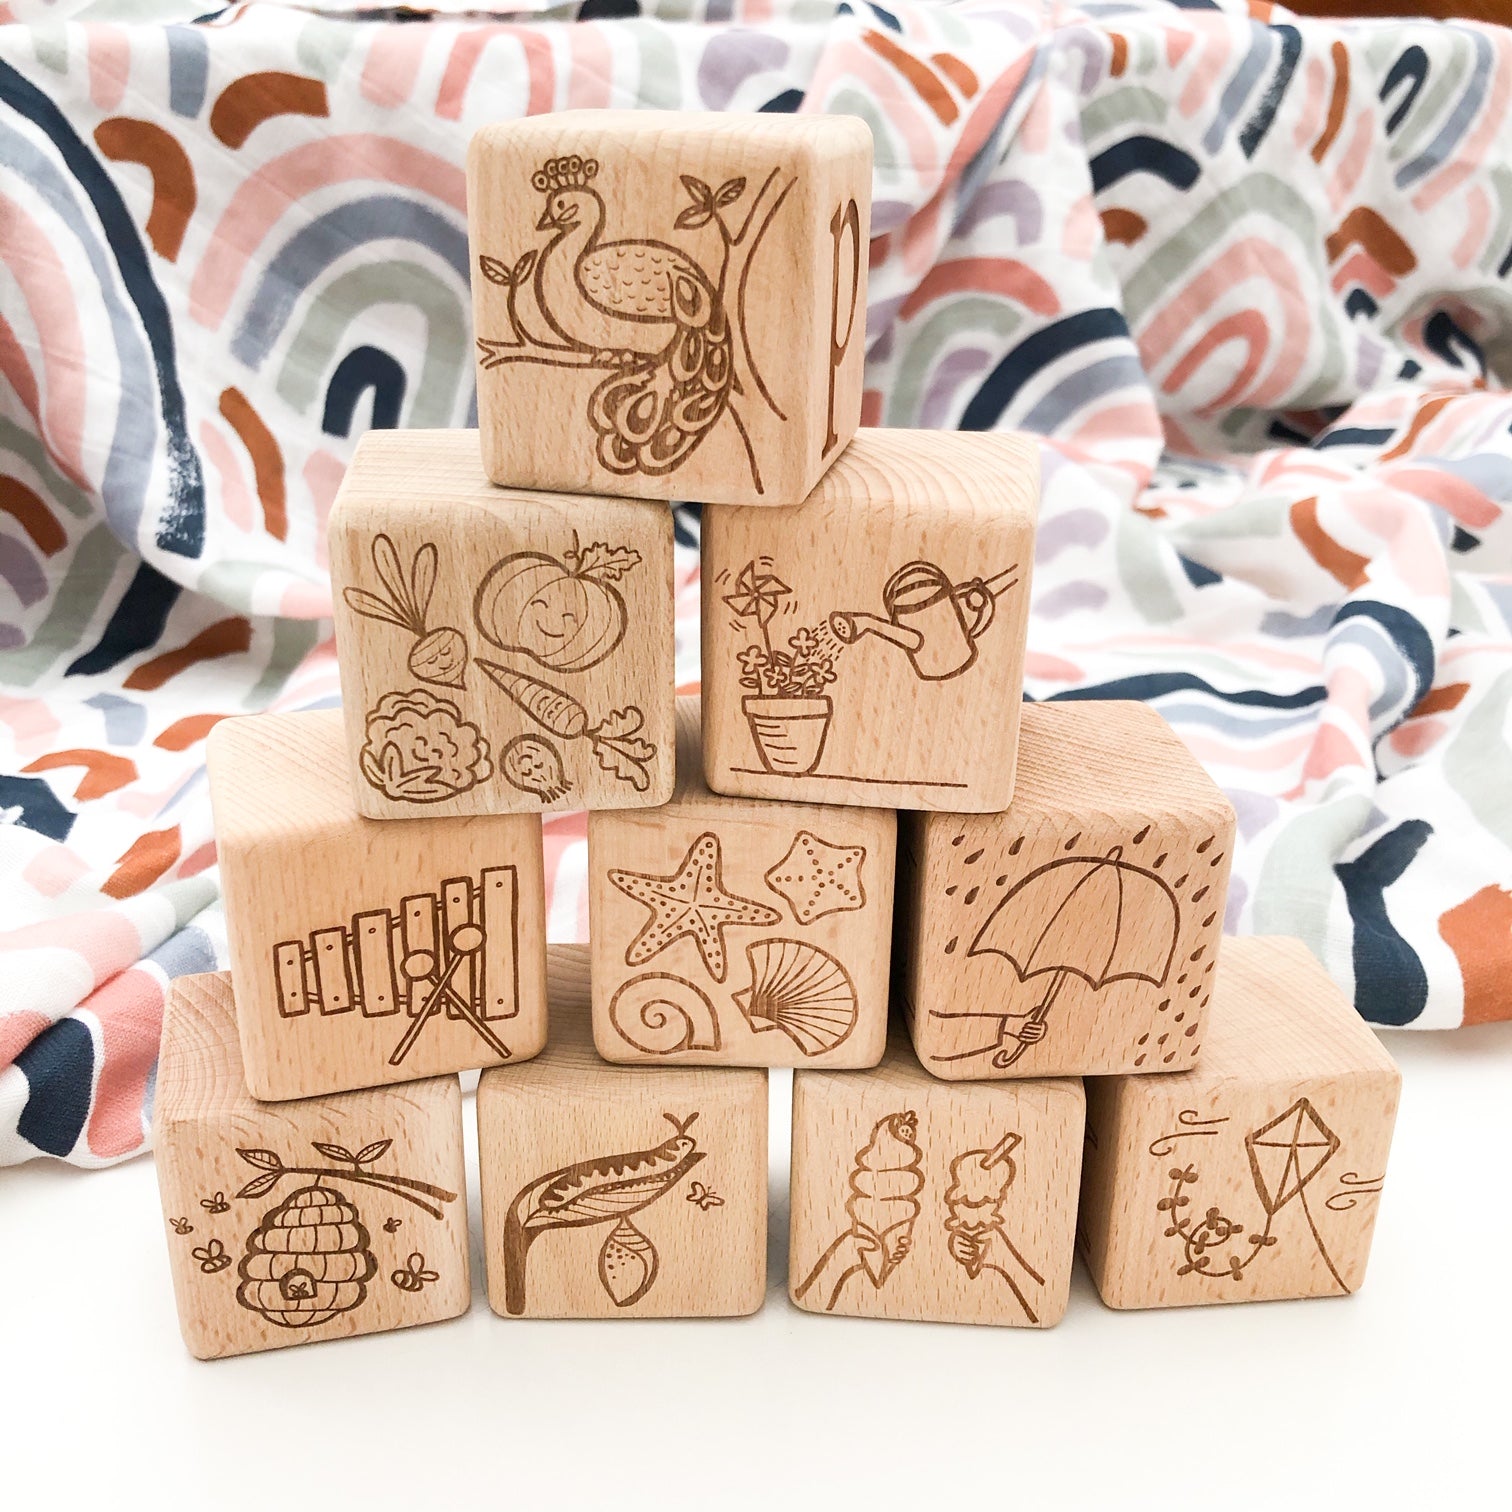 Personalised timber baby blocks - natural wooden baby blocks for